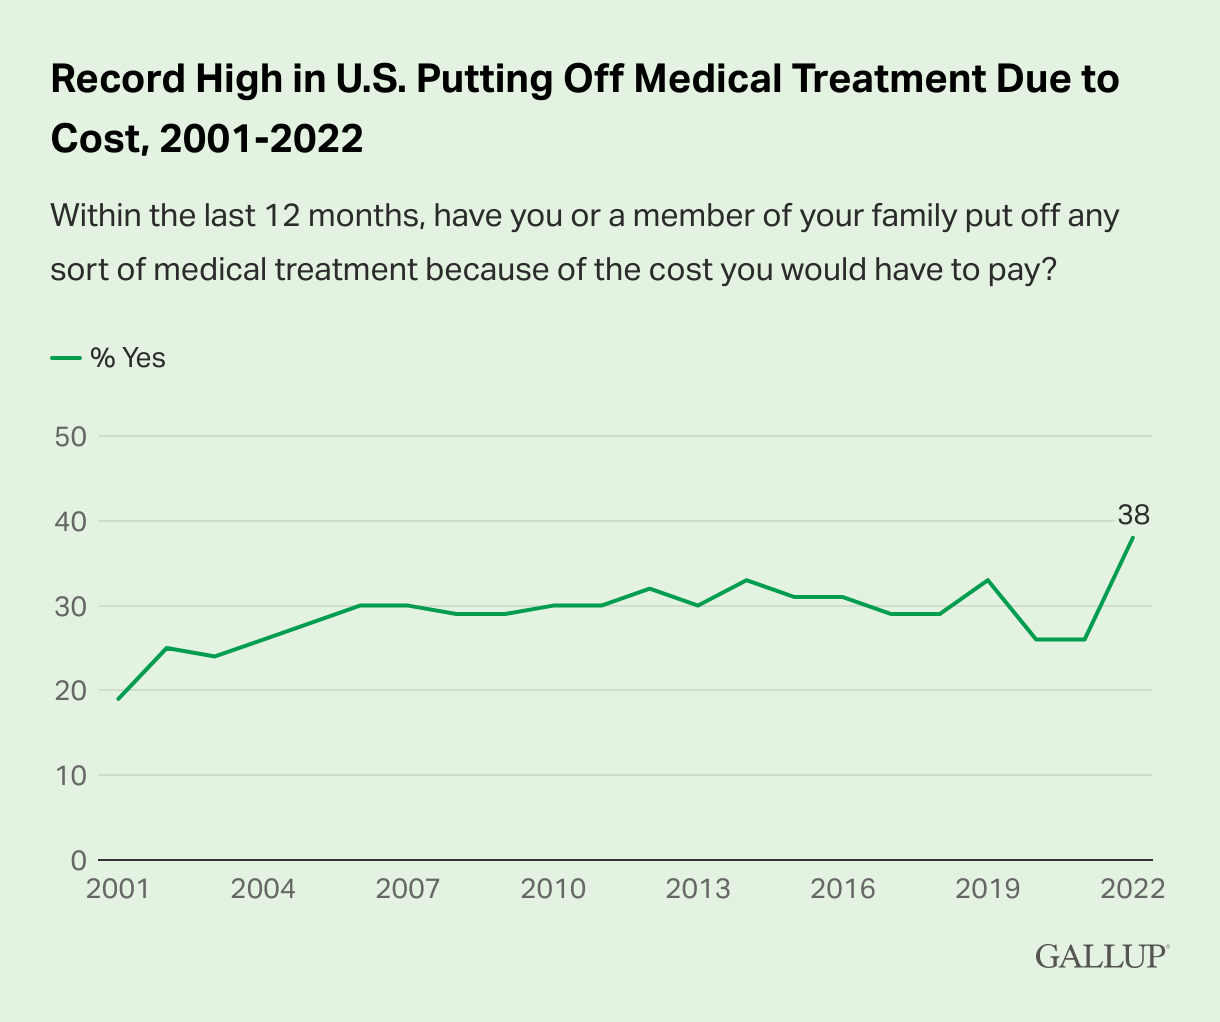 record-high-in-u.s.-putting-off-medical-treatment-due-to-cost-2001-2022